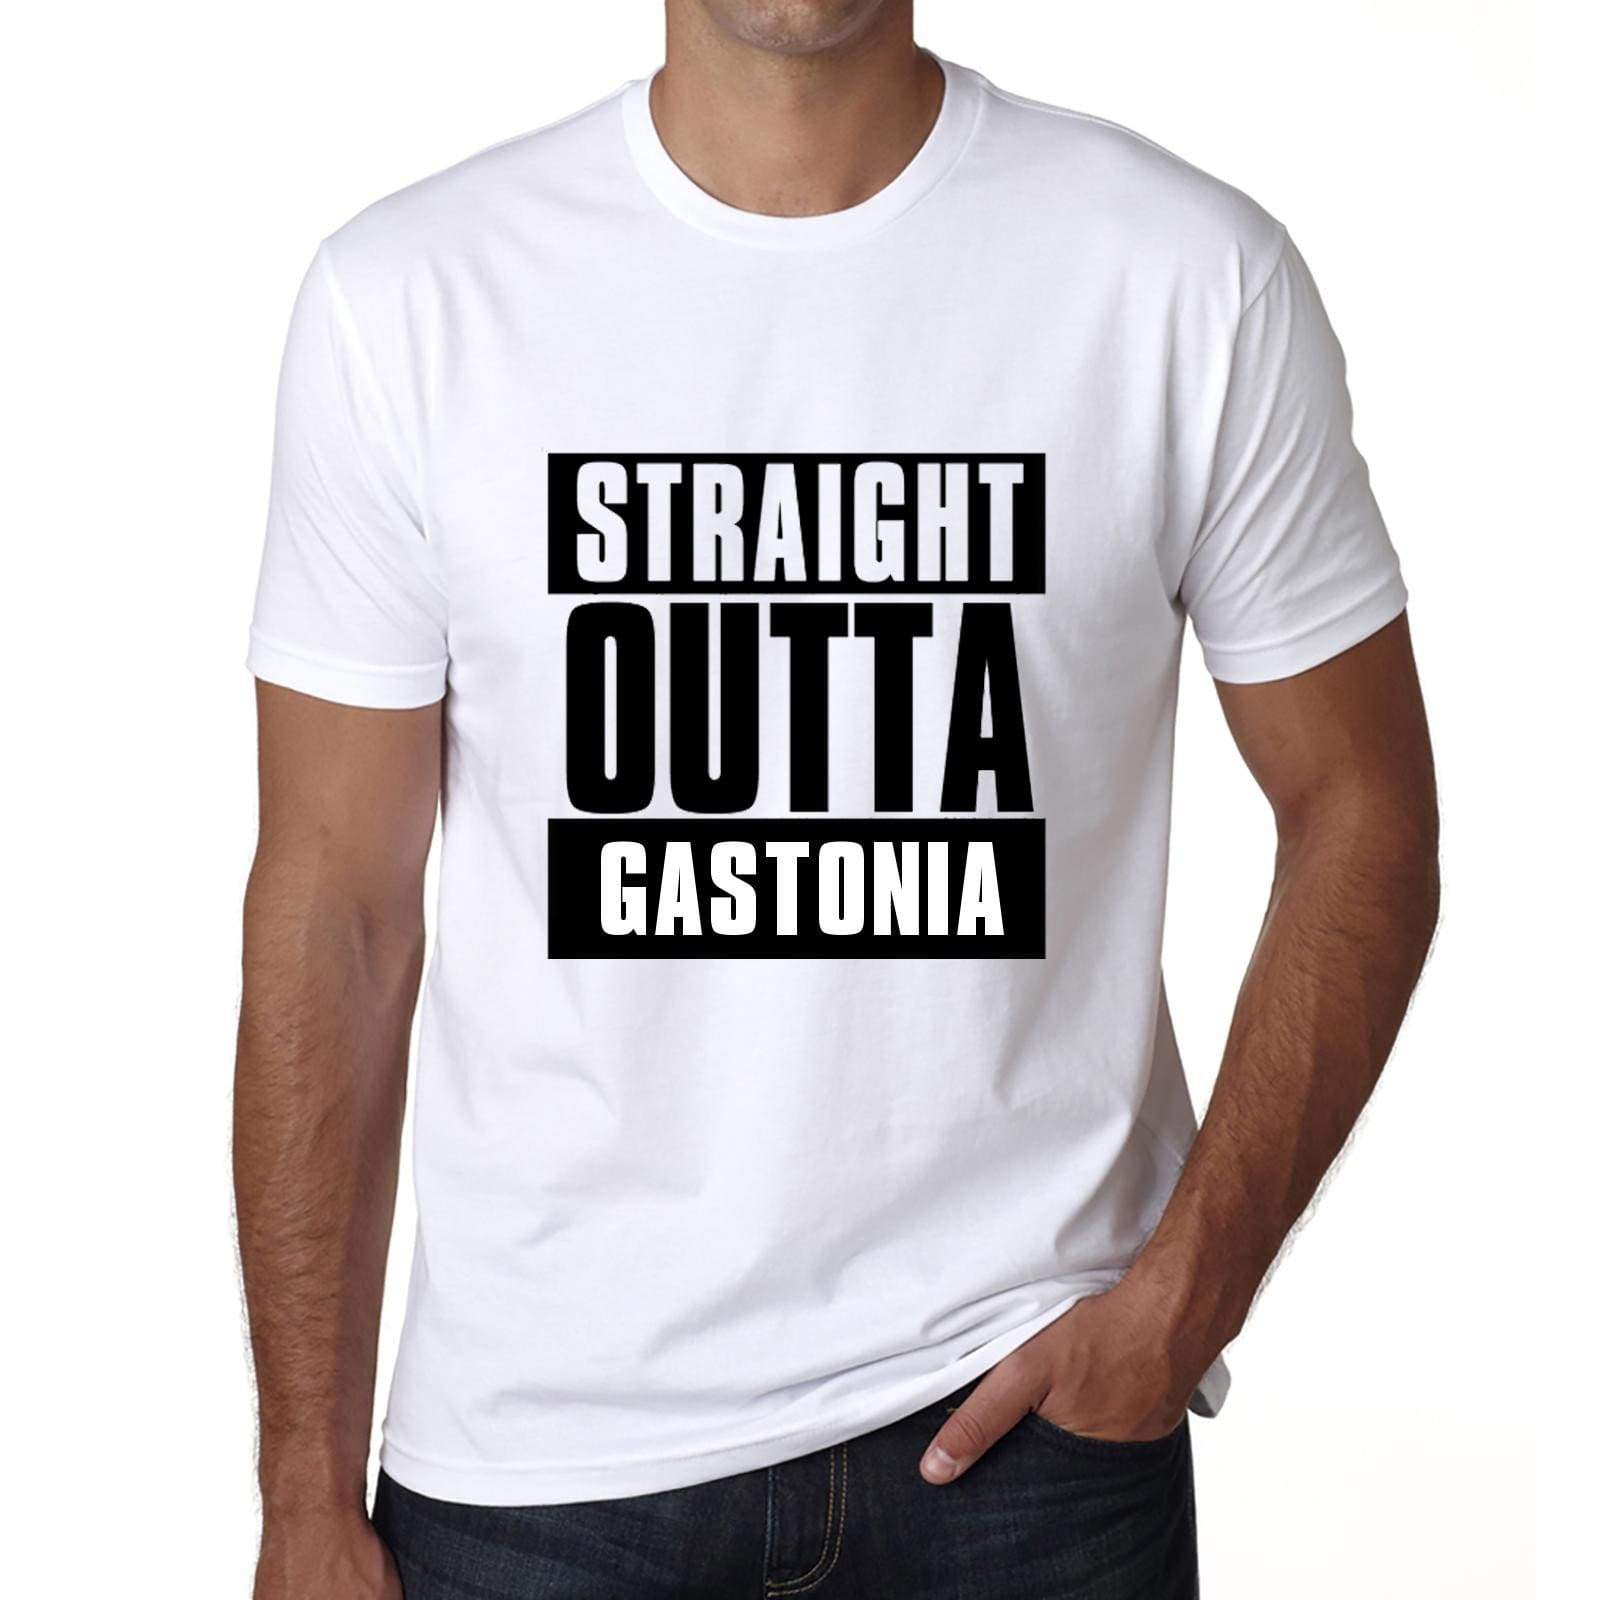 Straight Outta Gastonia Mens Short Sleeve Round Neck T-Shirt 00027 - White / S - Casual